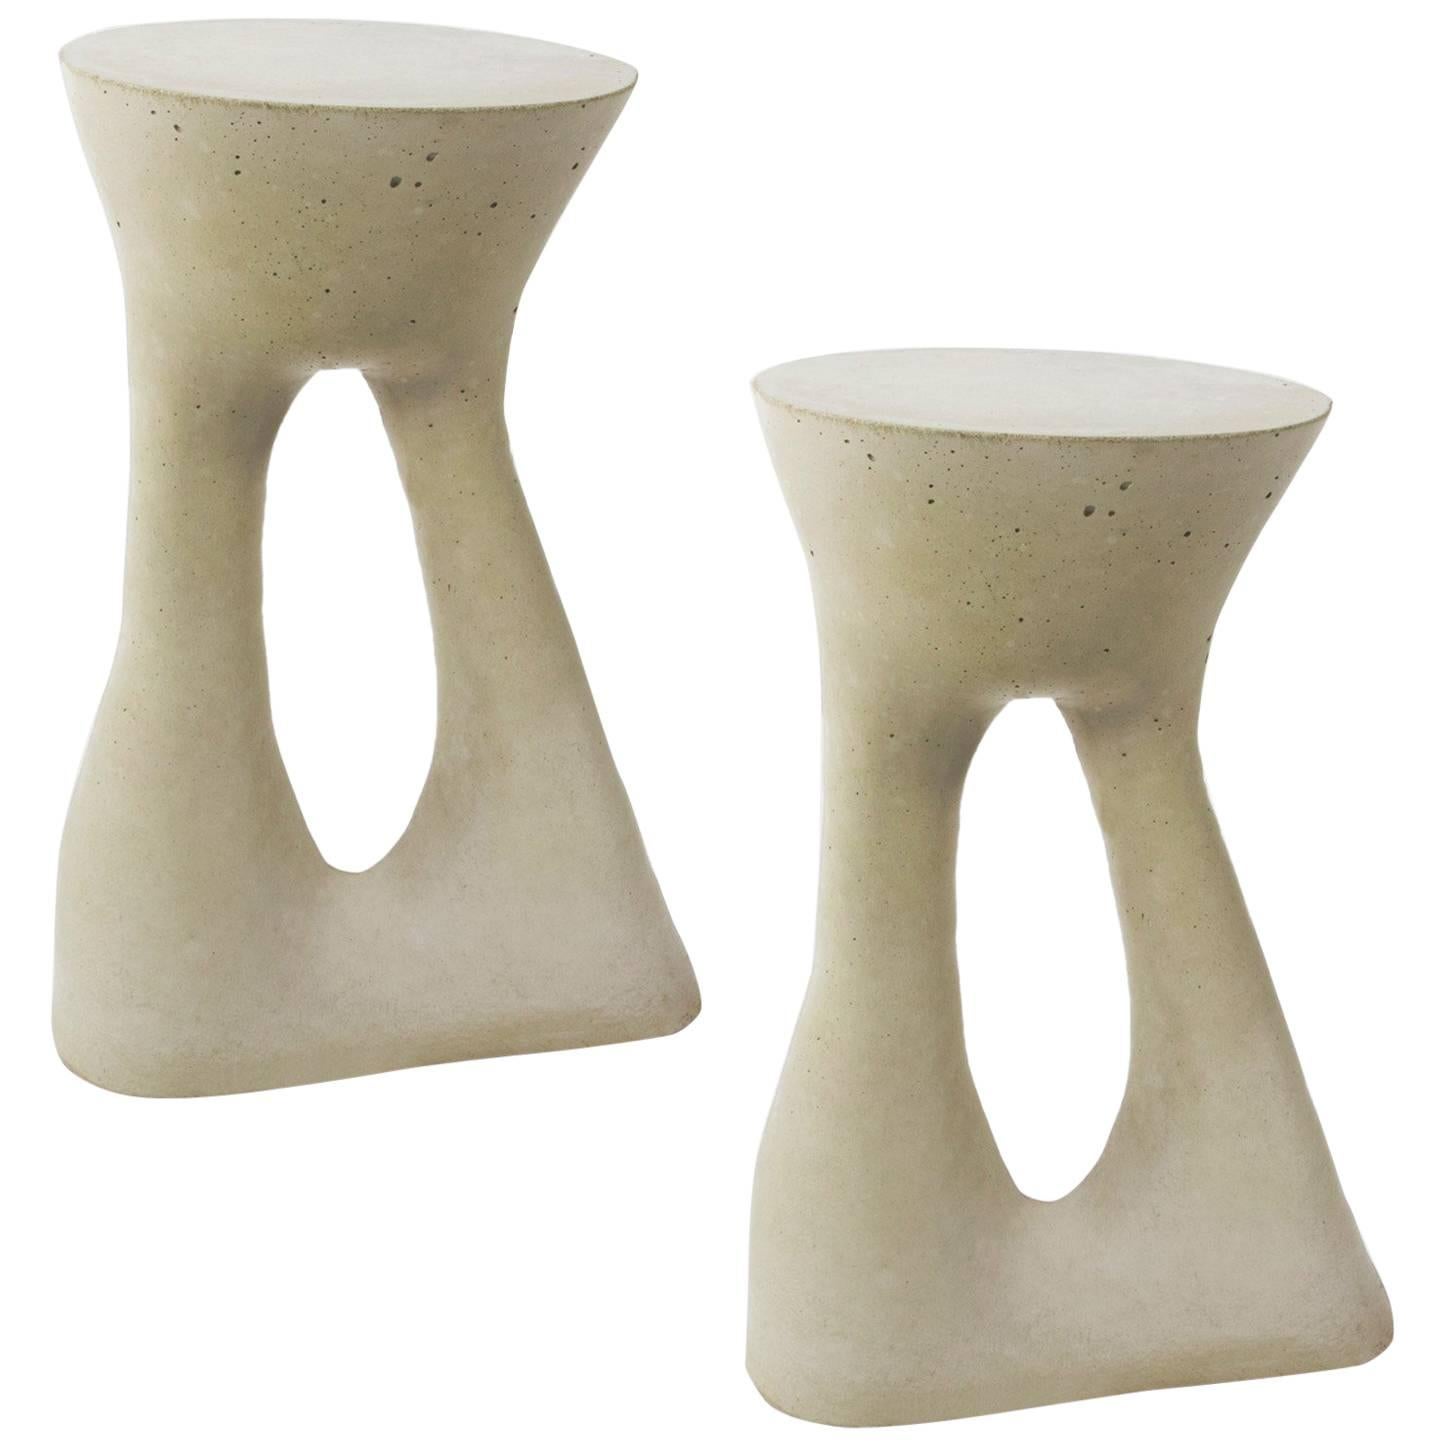 Pair of Tall Grey Kreten Side Tables from Souda, Made to Order